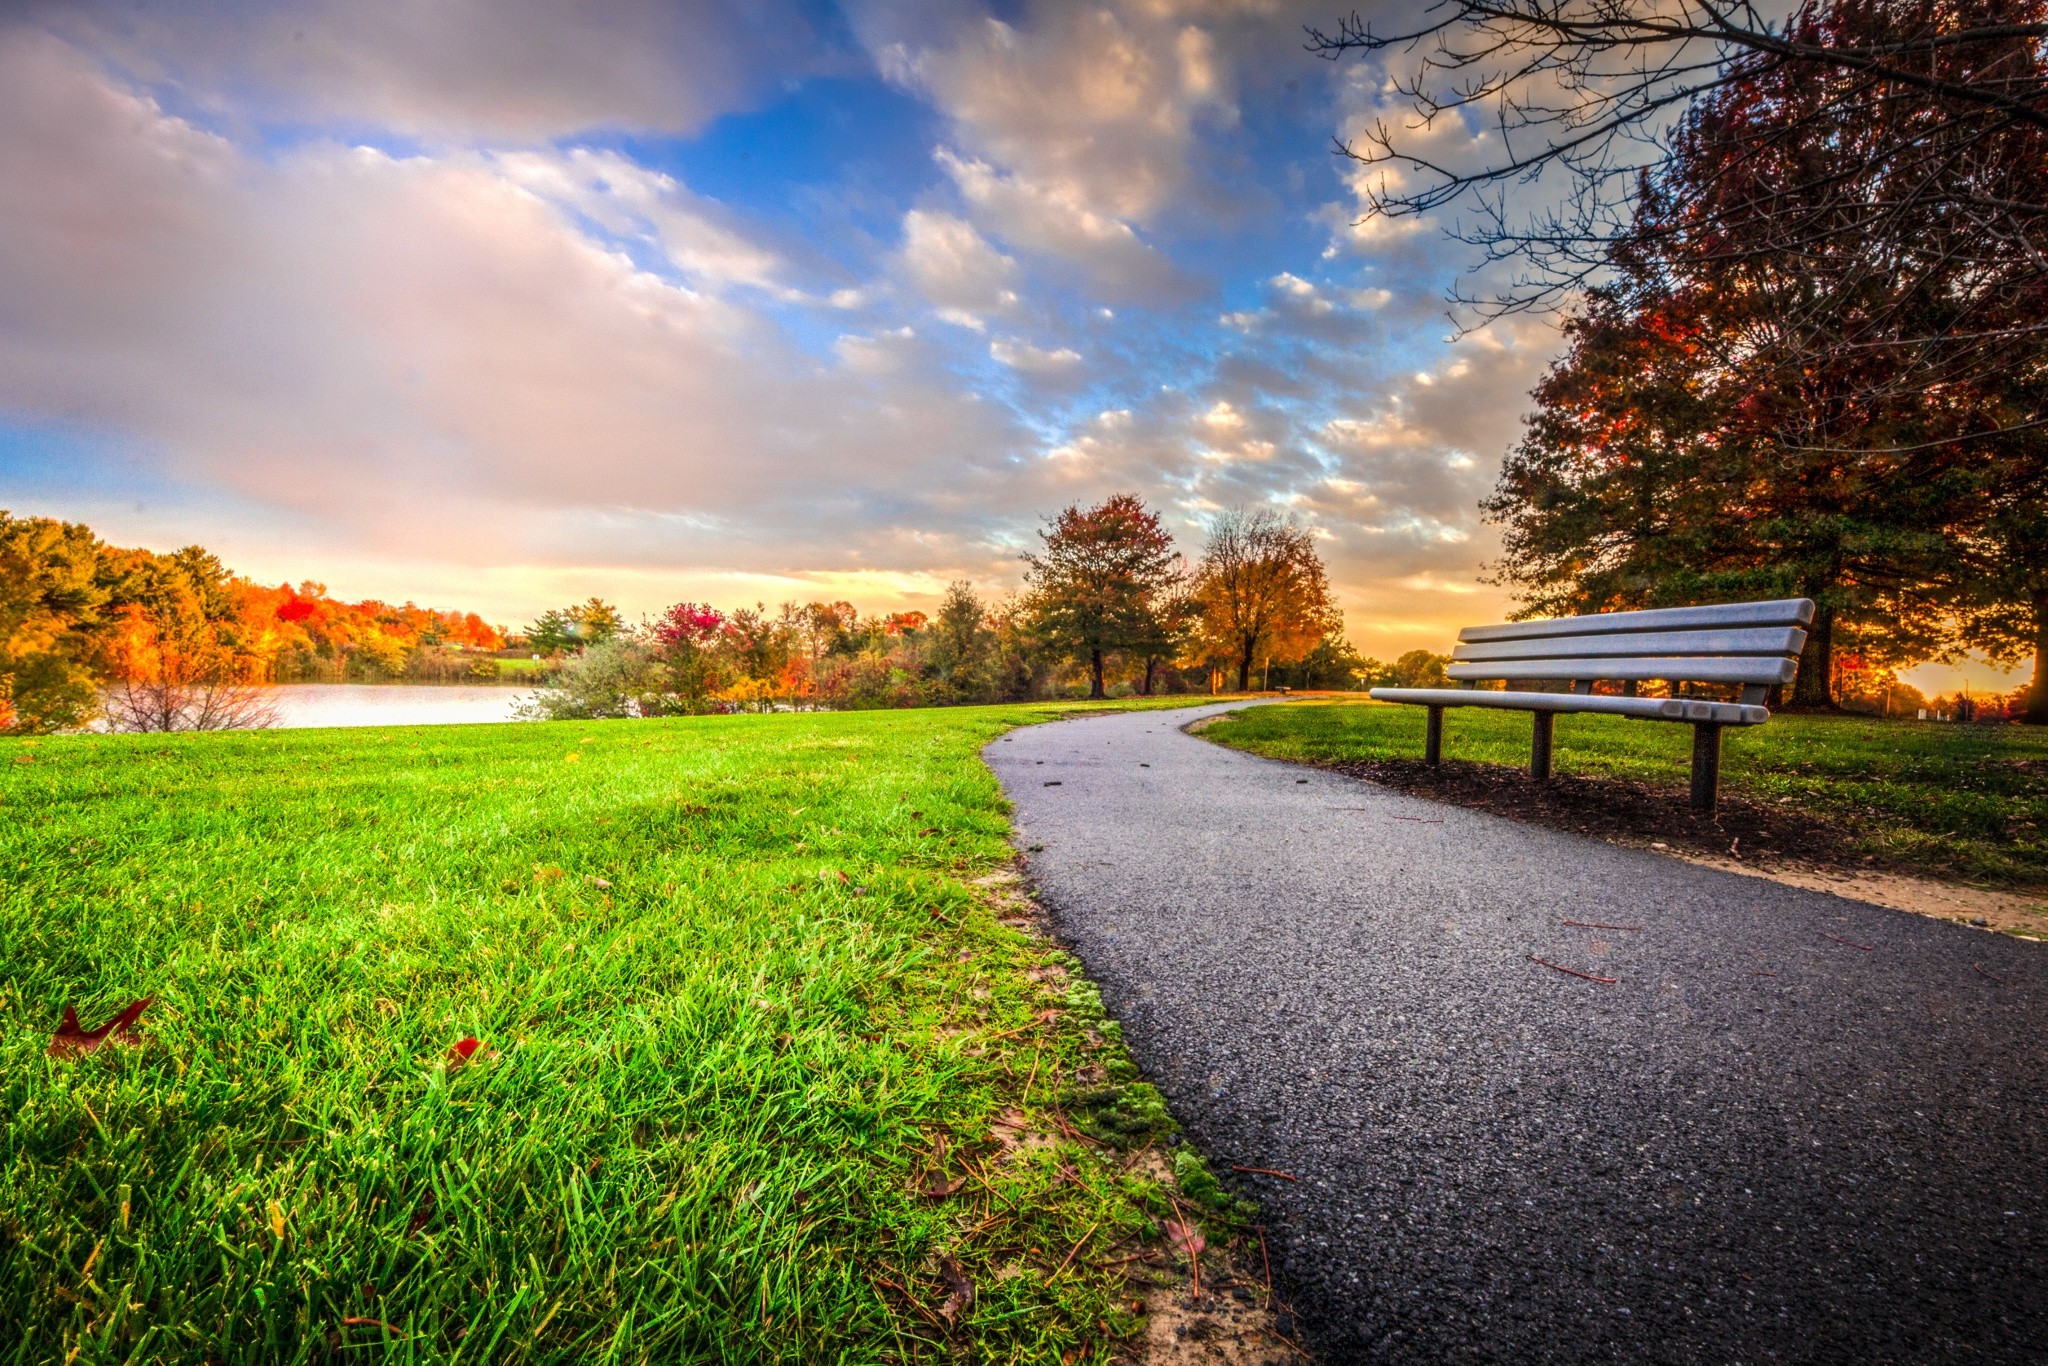 sunset, Bench, Park, Trees, Clouds, Grass, Fall, Nature, Landscape